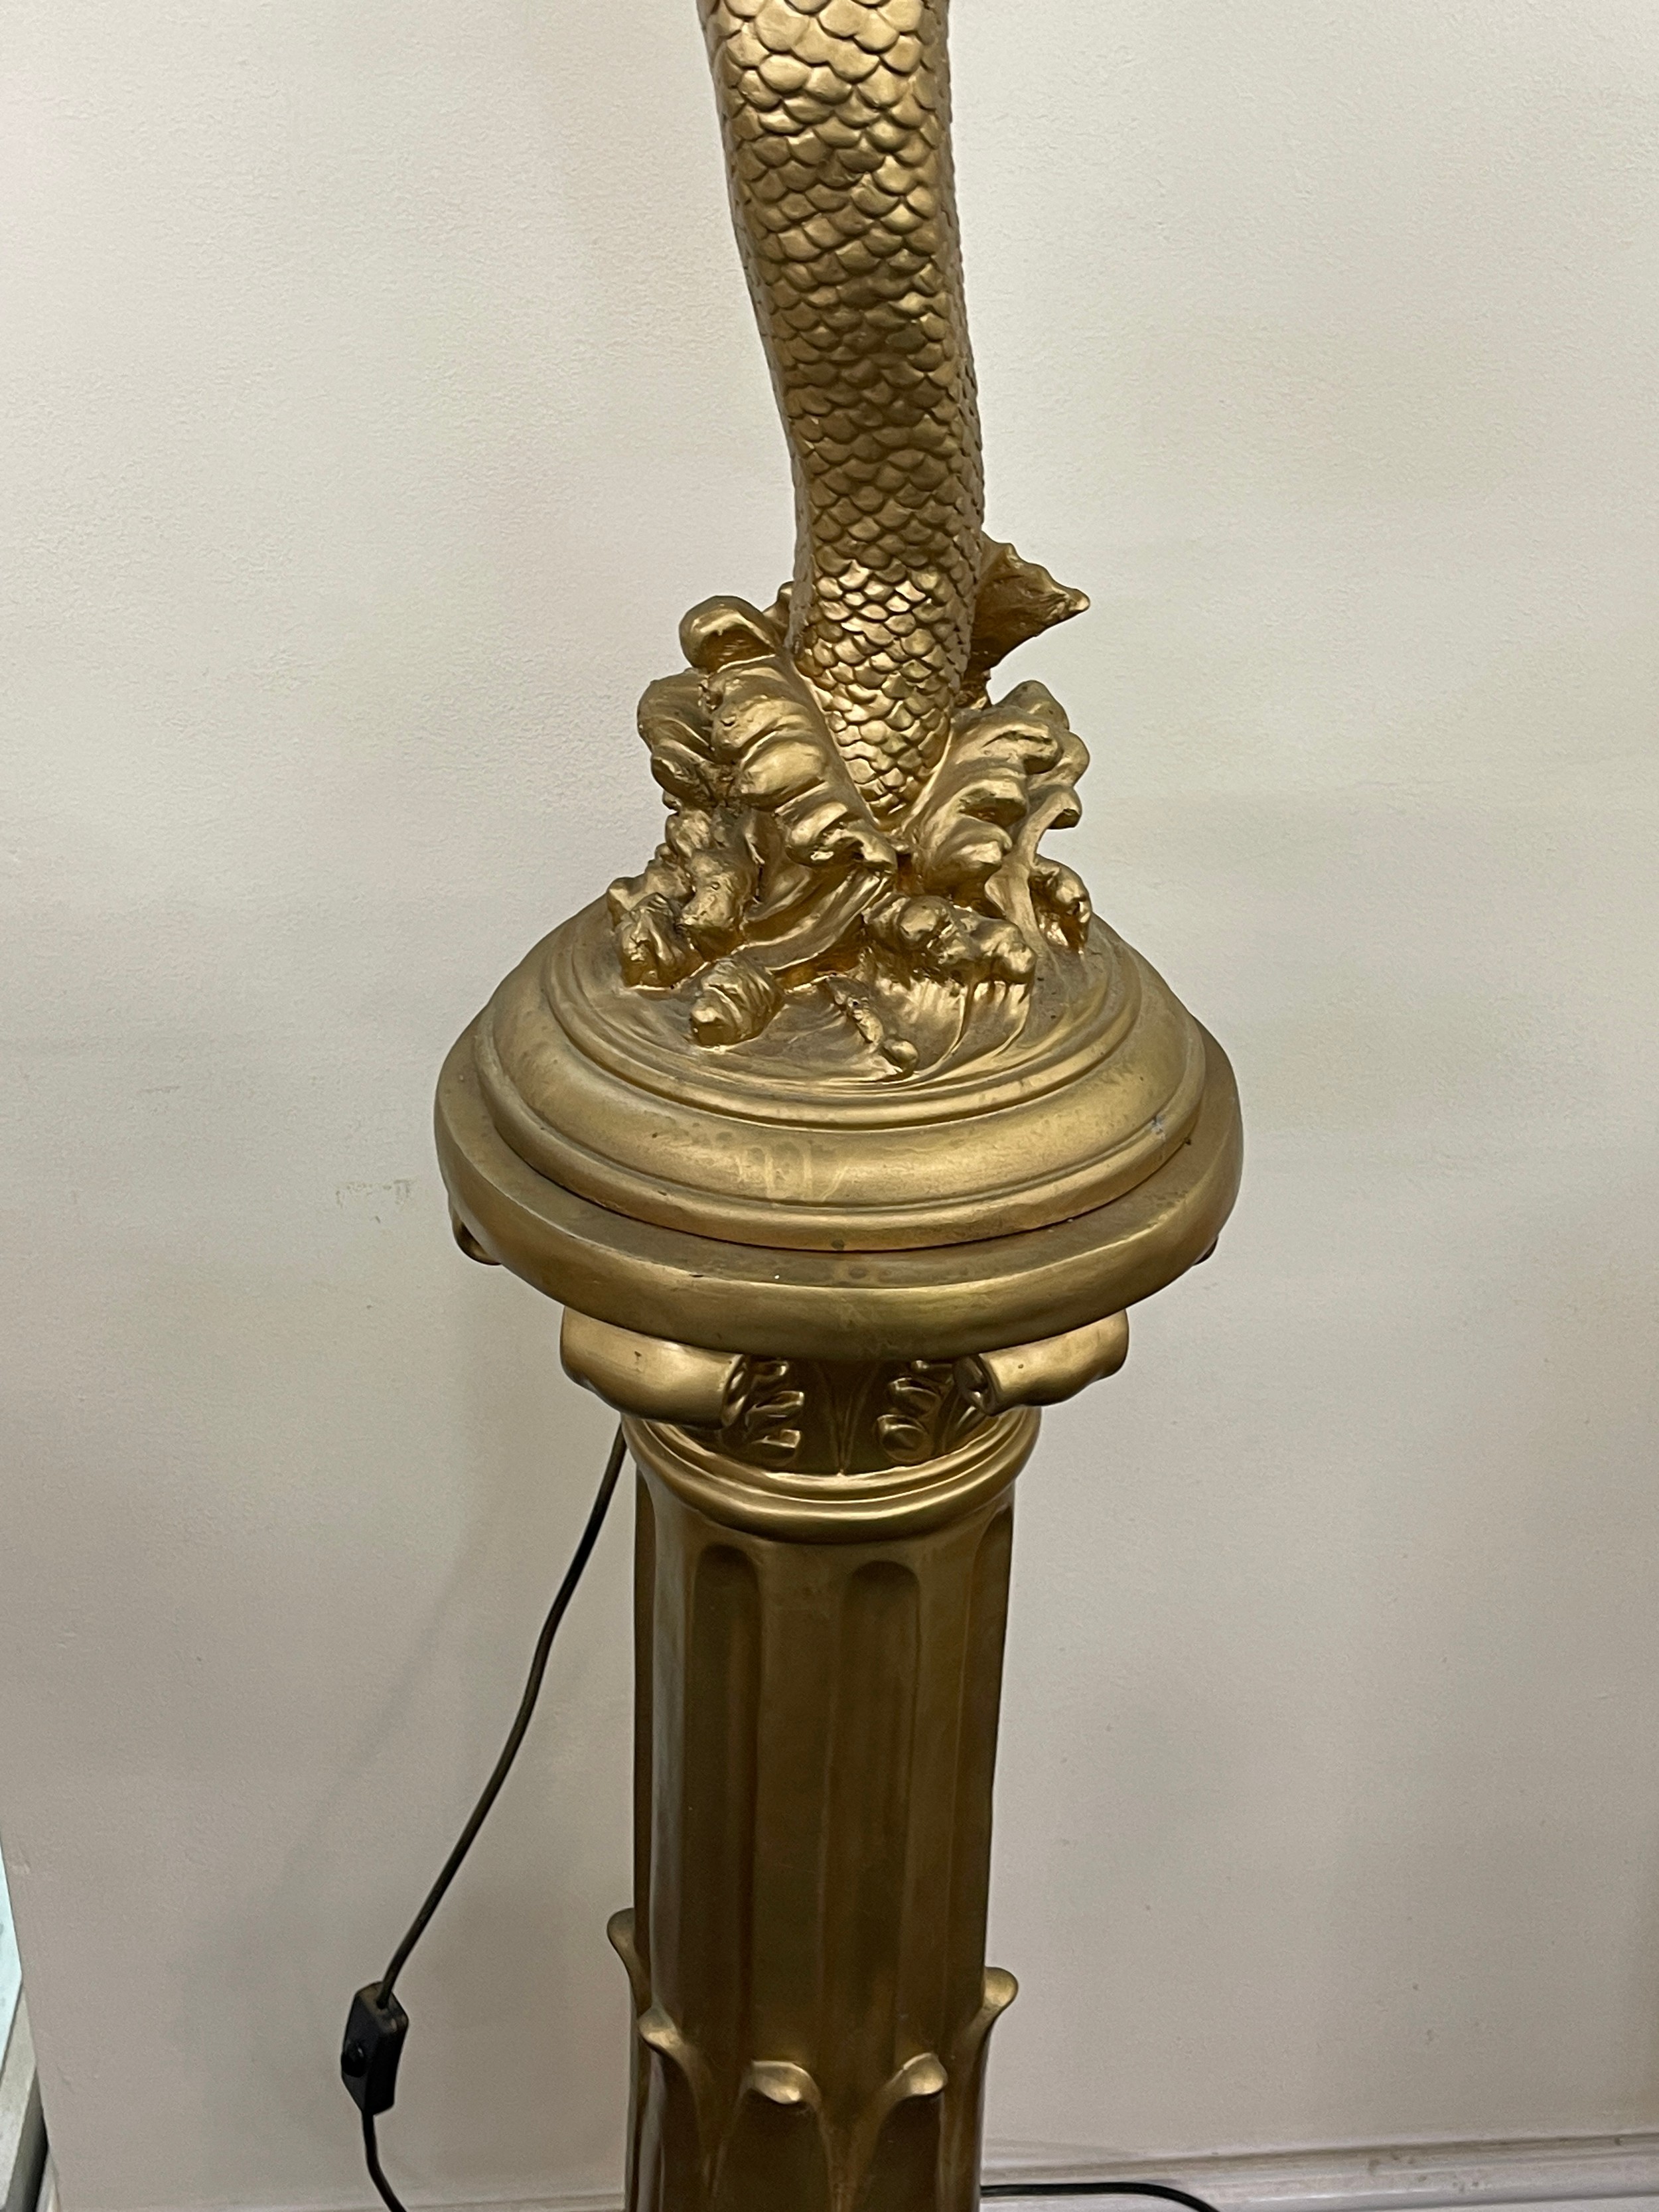 Tall mermaid resin lamp on plinth, approximately 75.5 inches tall, working order with glass shade - Image 4 of 11